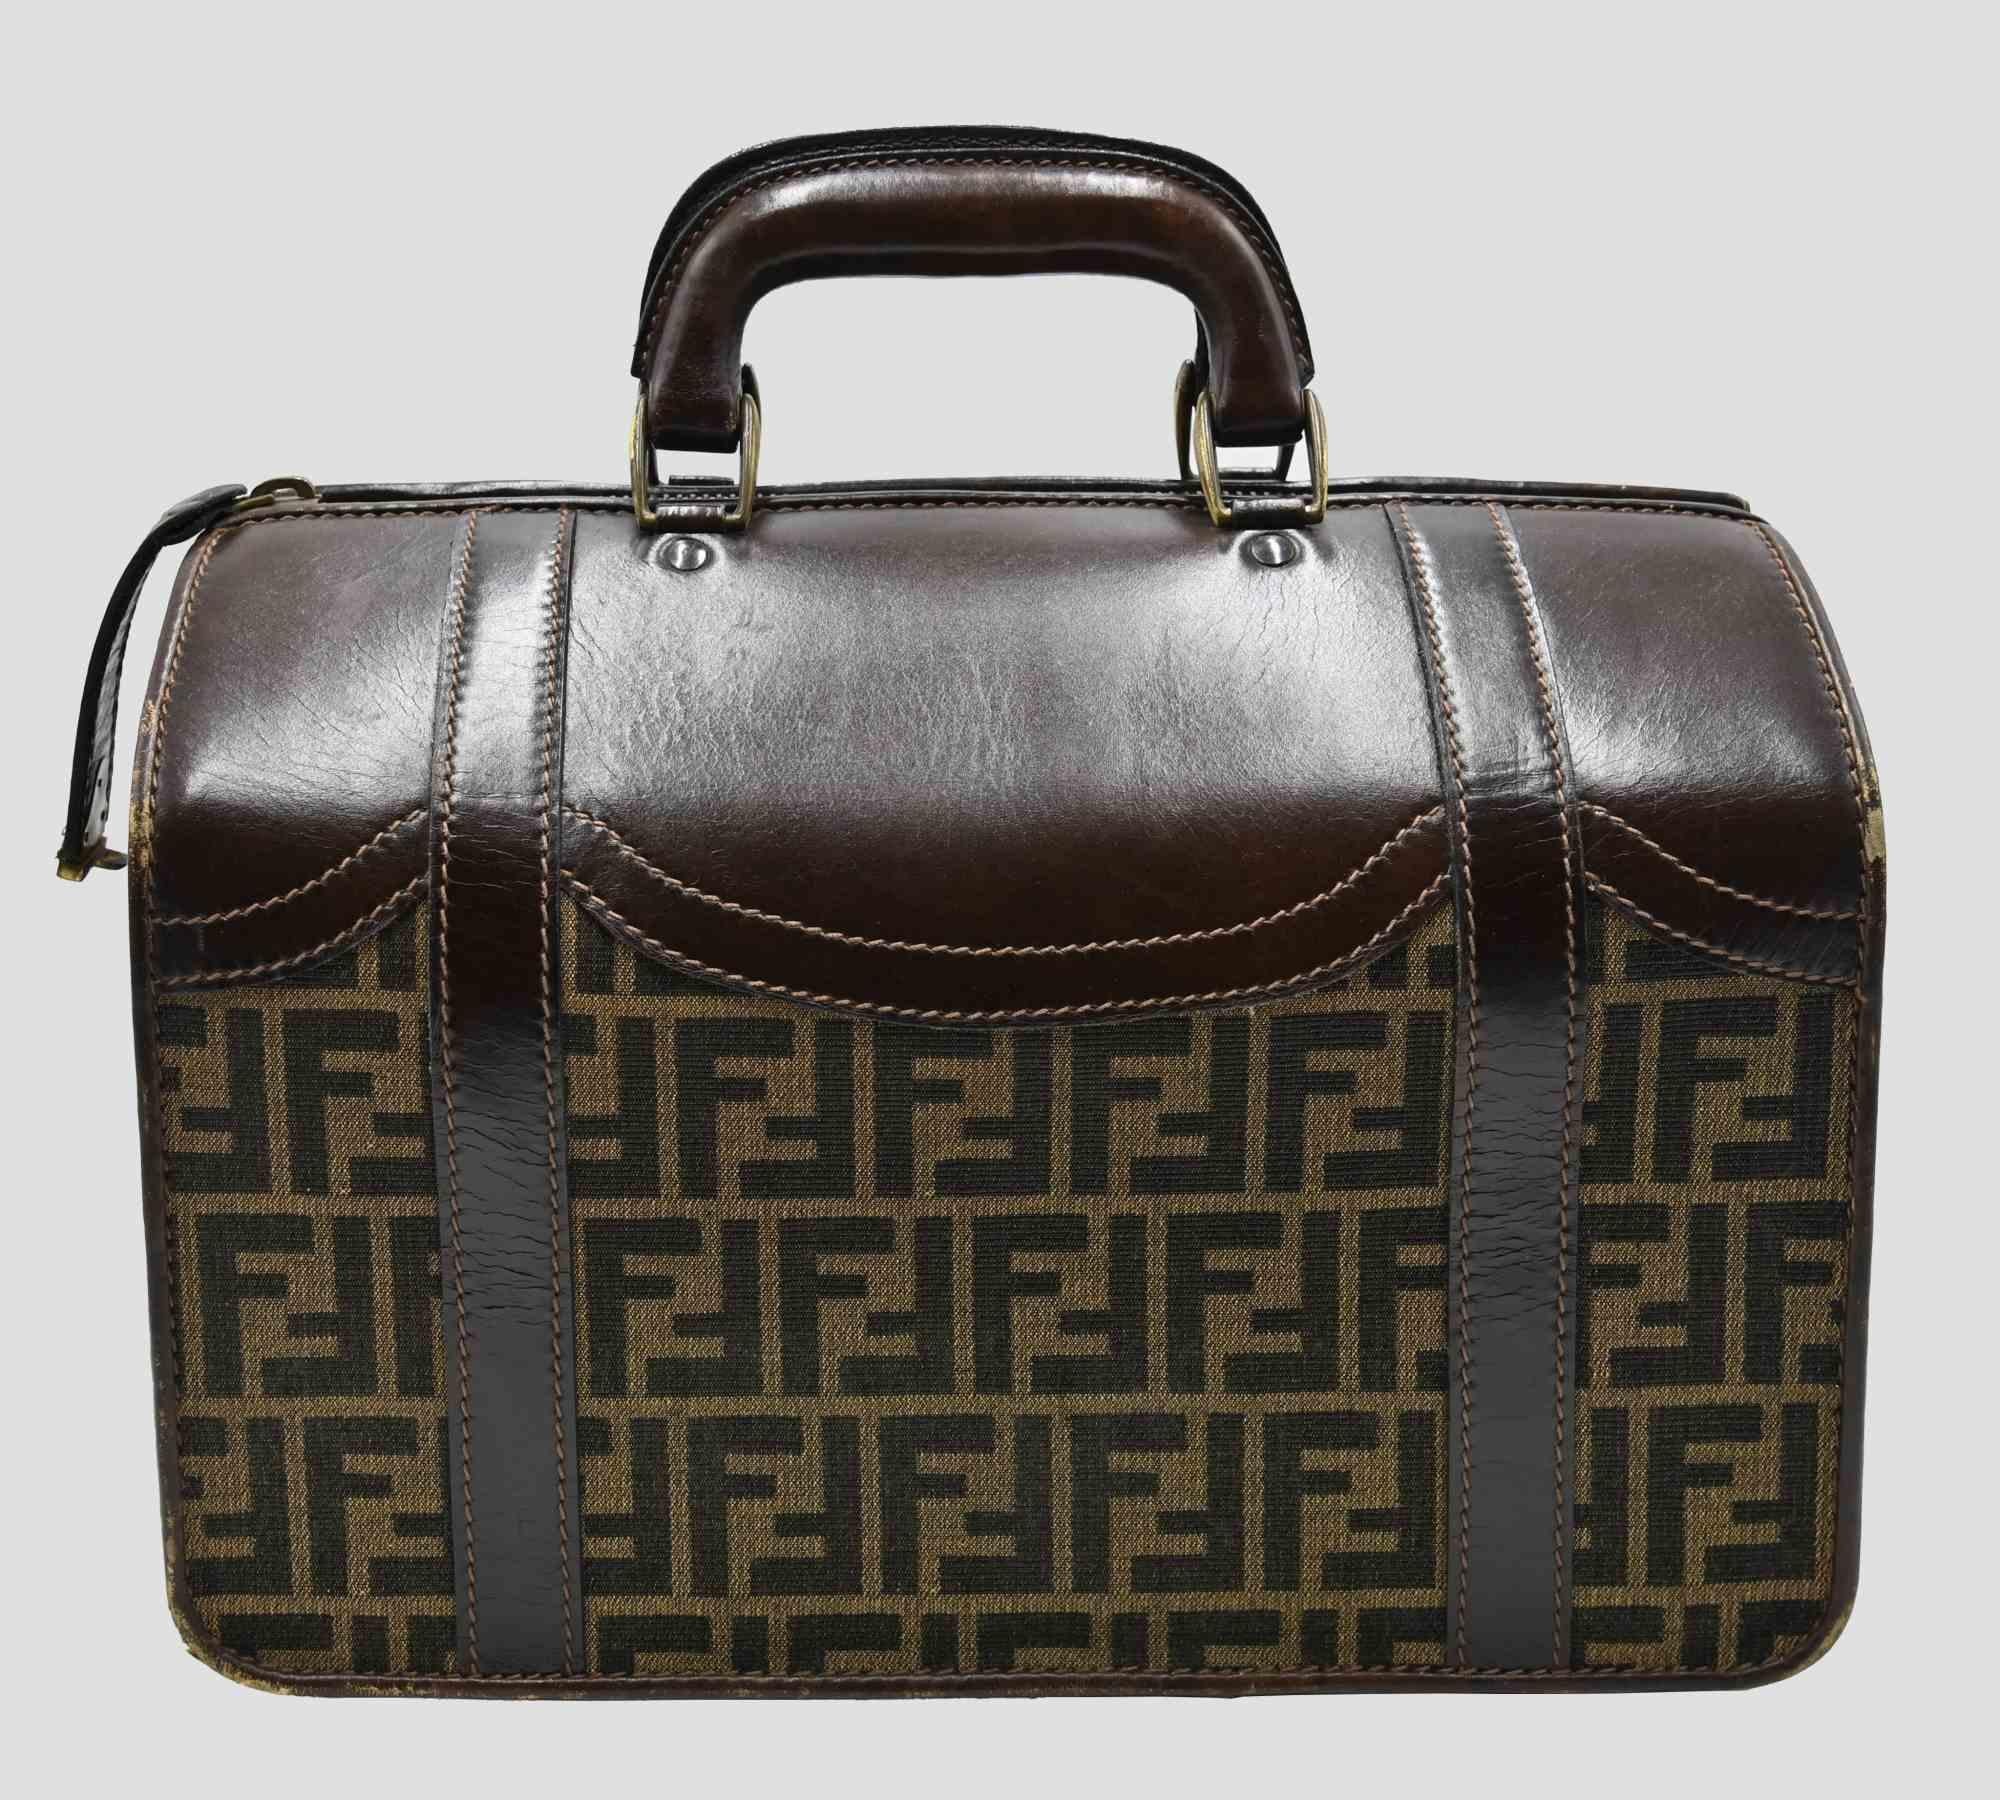 Leather Vintage Suitcases Set by Fendi, Brown Monogram Travel, 1980s For Sale